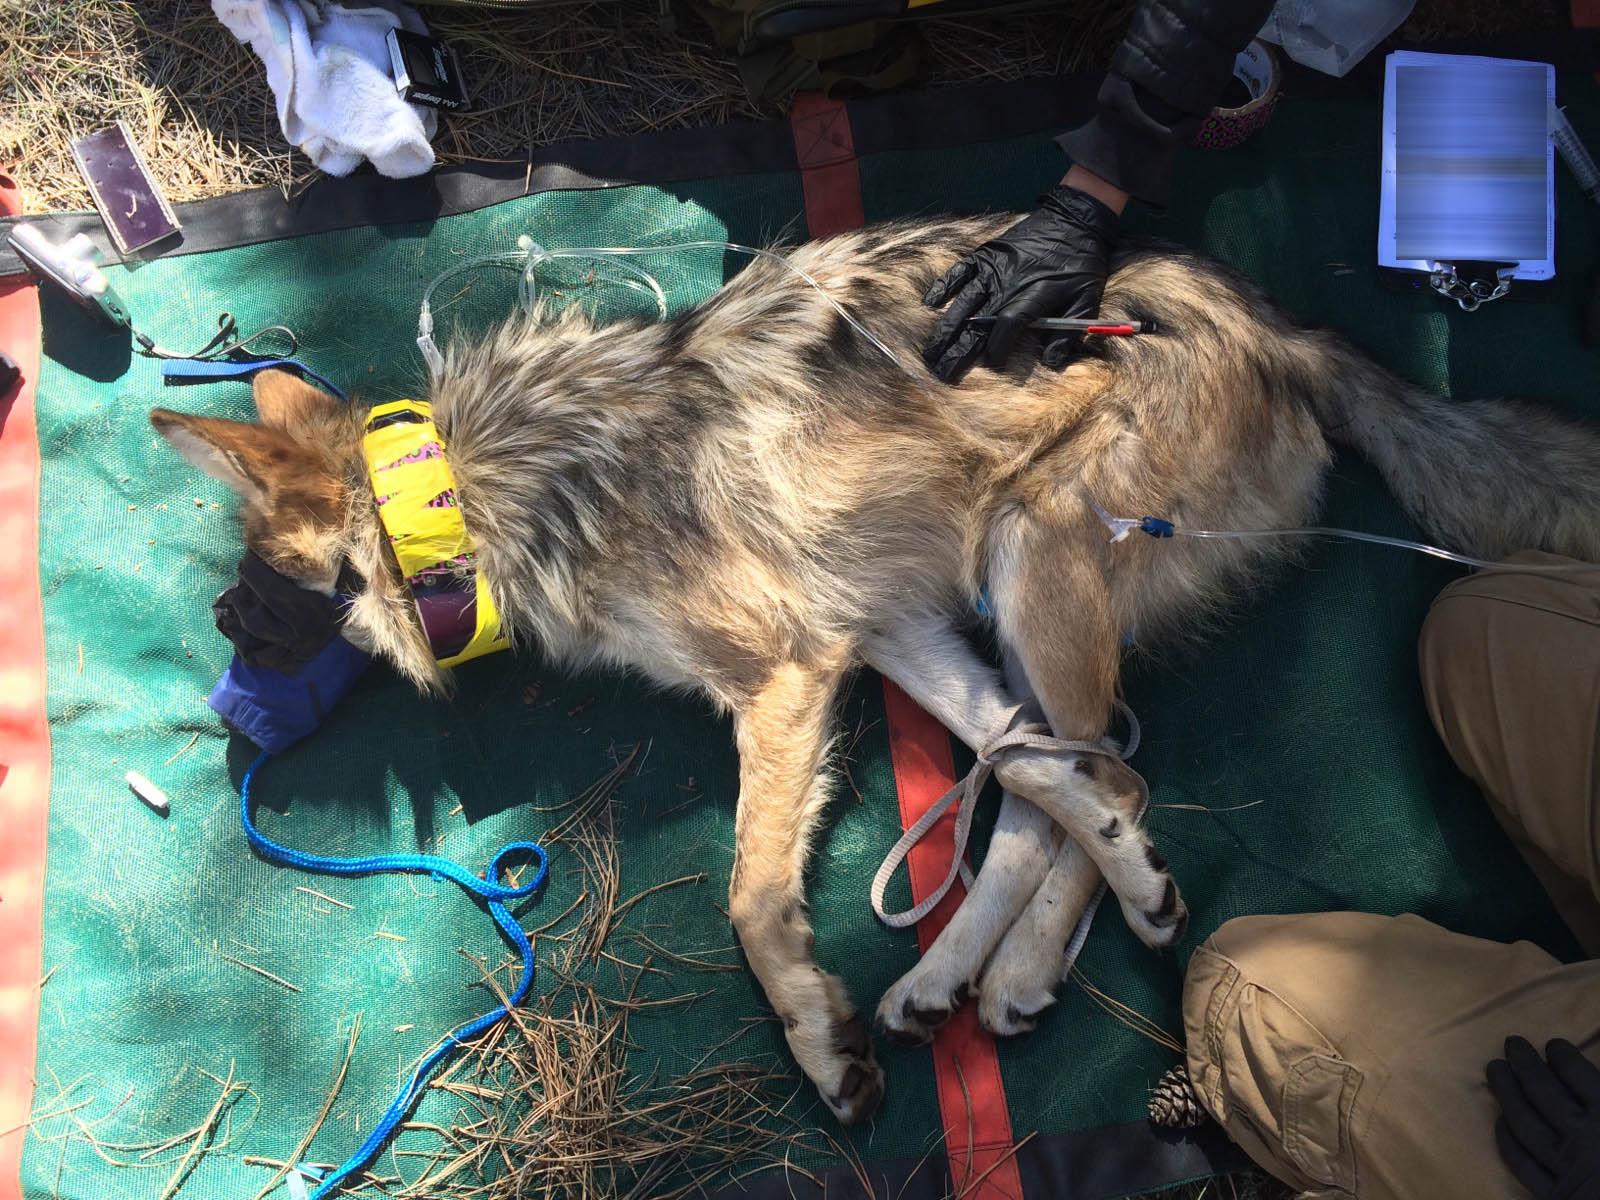 Connie, a Mexican wolf born at Brookfield Zoo, is outfitted with a GPS radio collar by workers from the U.S. Fish and Wildlife Service. (Courtesy U.S. Fish and Wildlife Service Interagency Field Team)